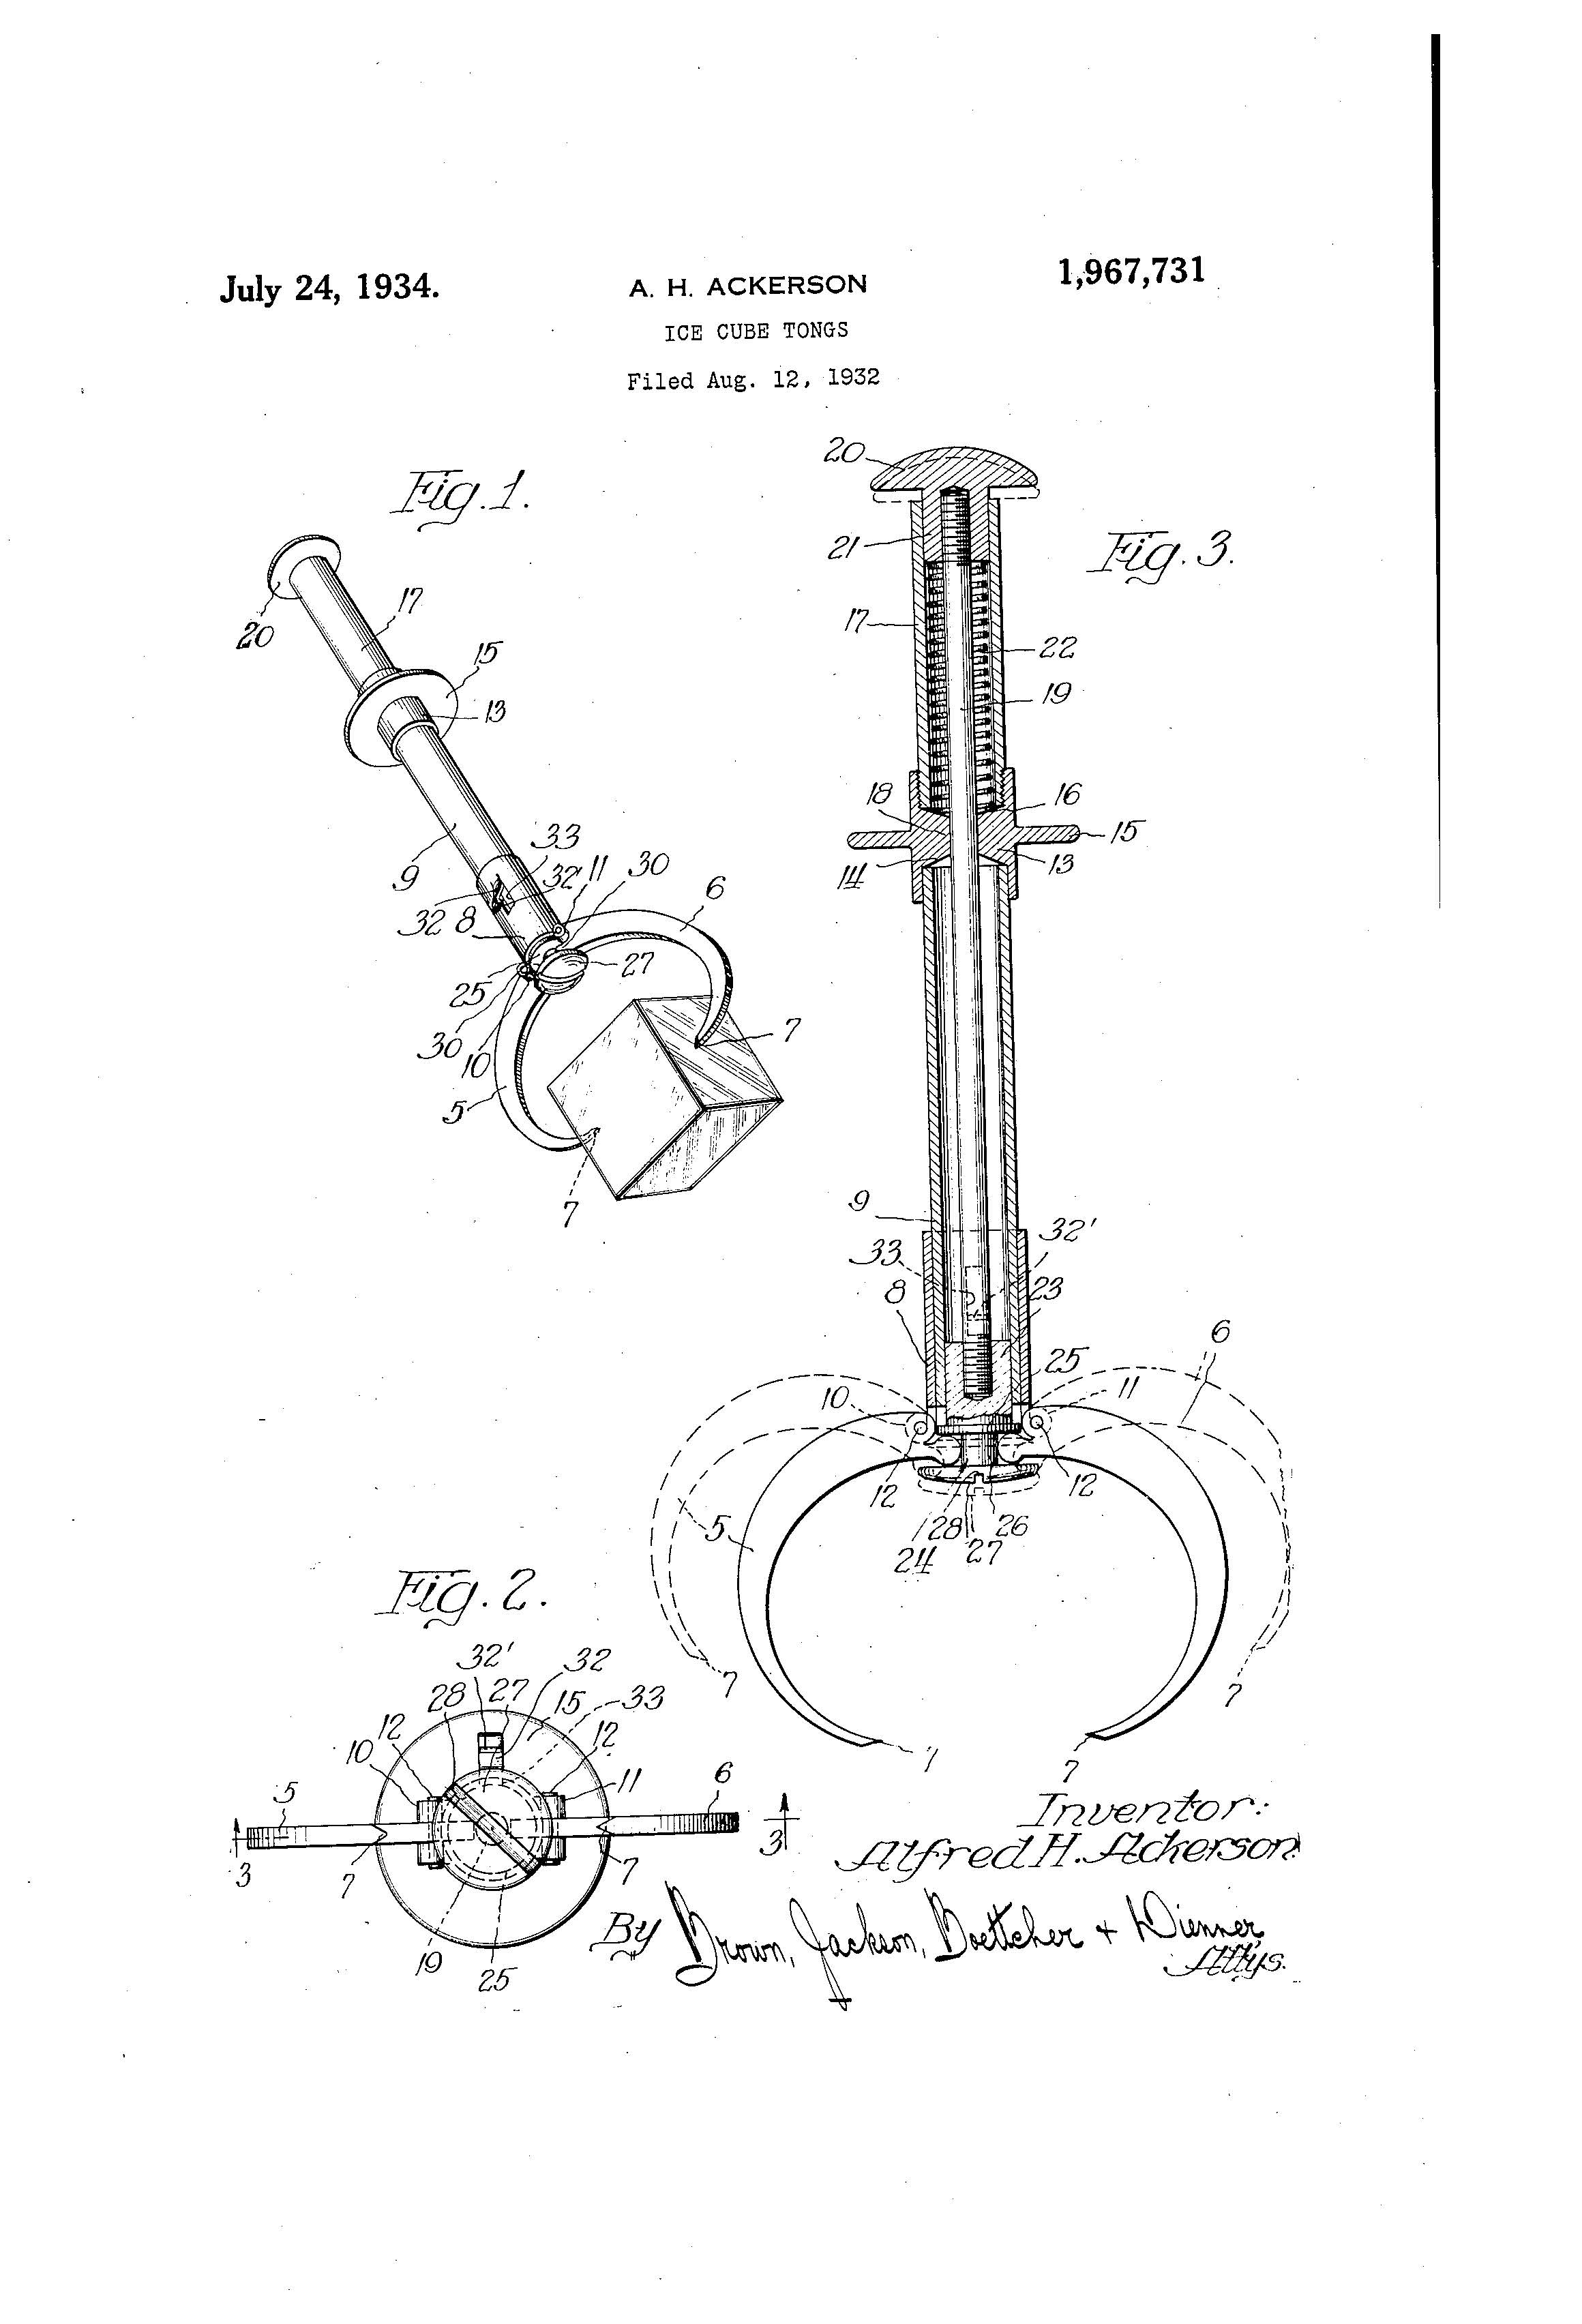 Ice Cube tongs Patent